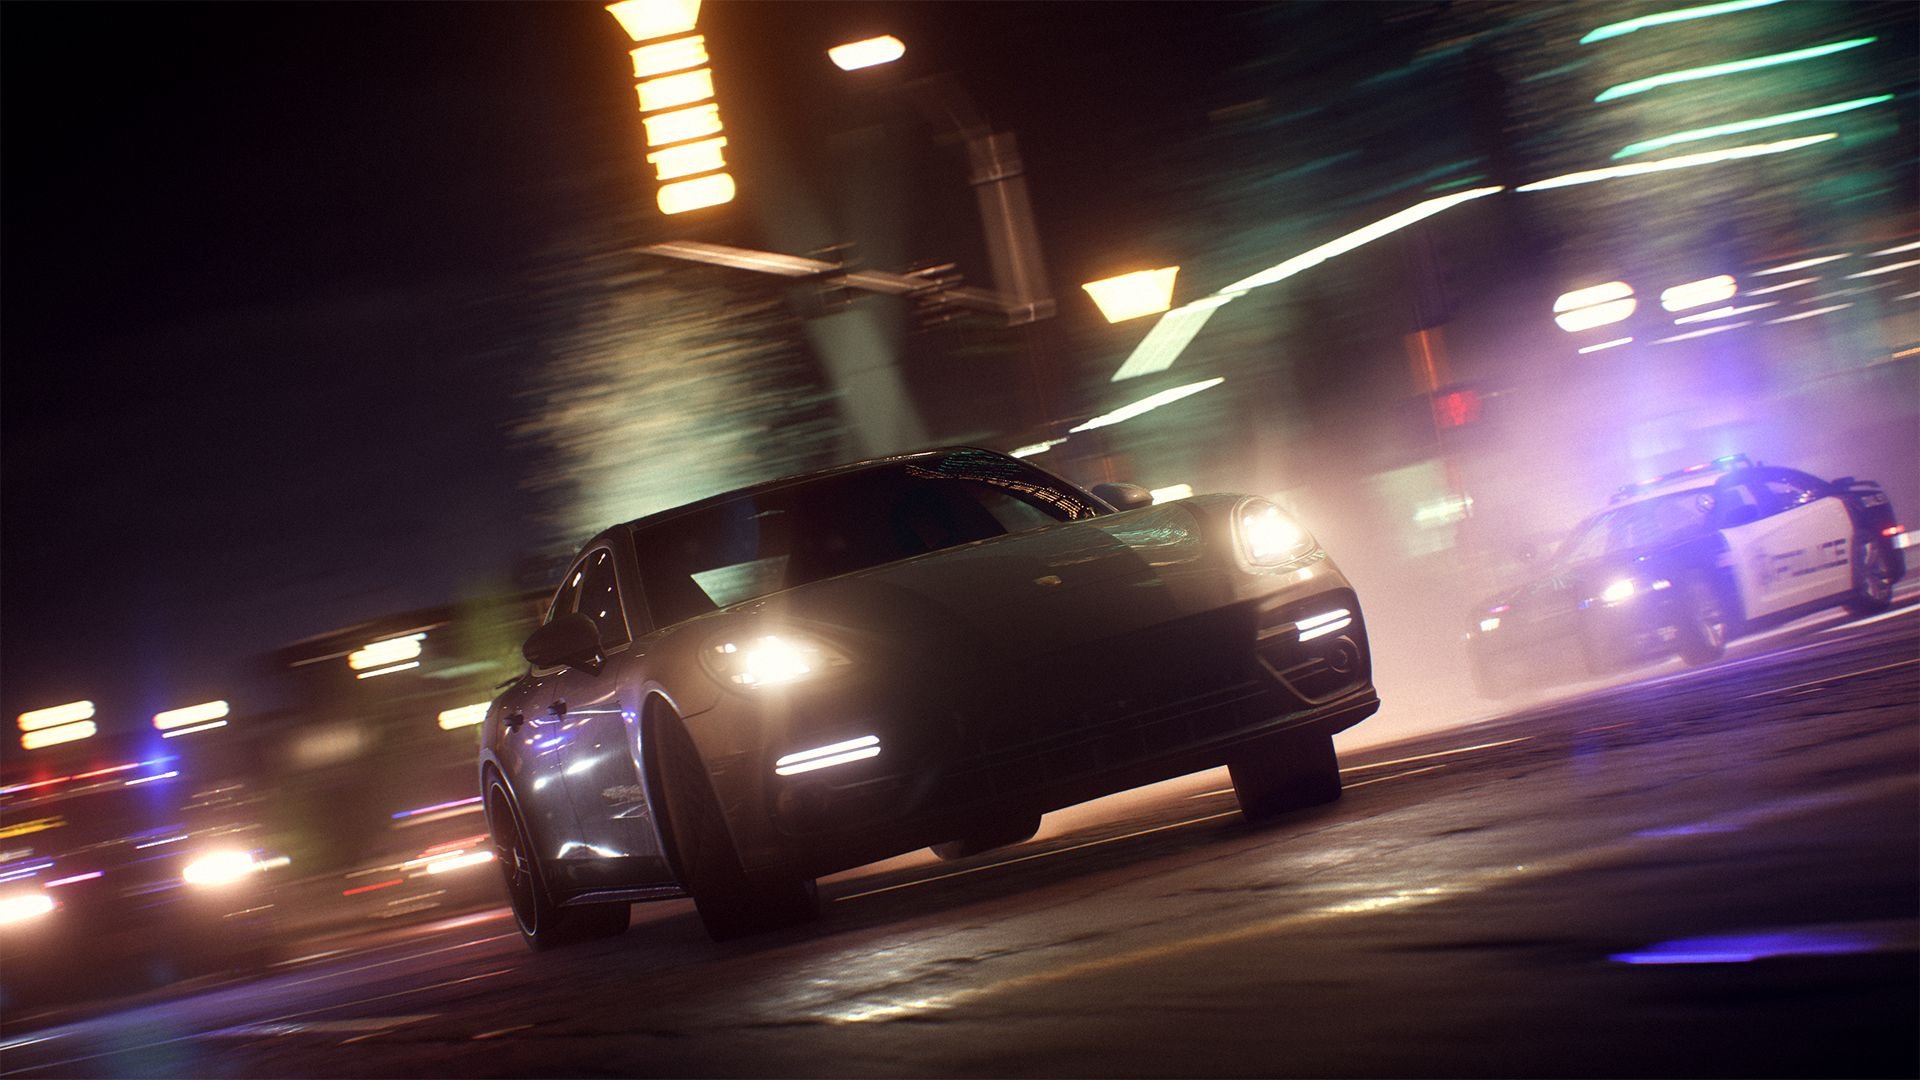 Need for Speed Payback review